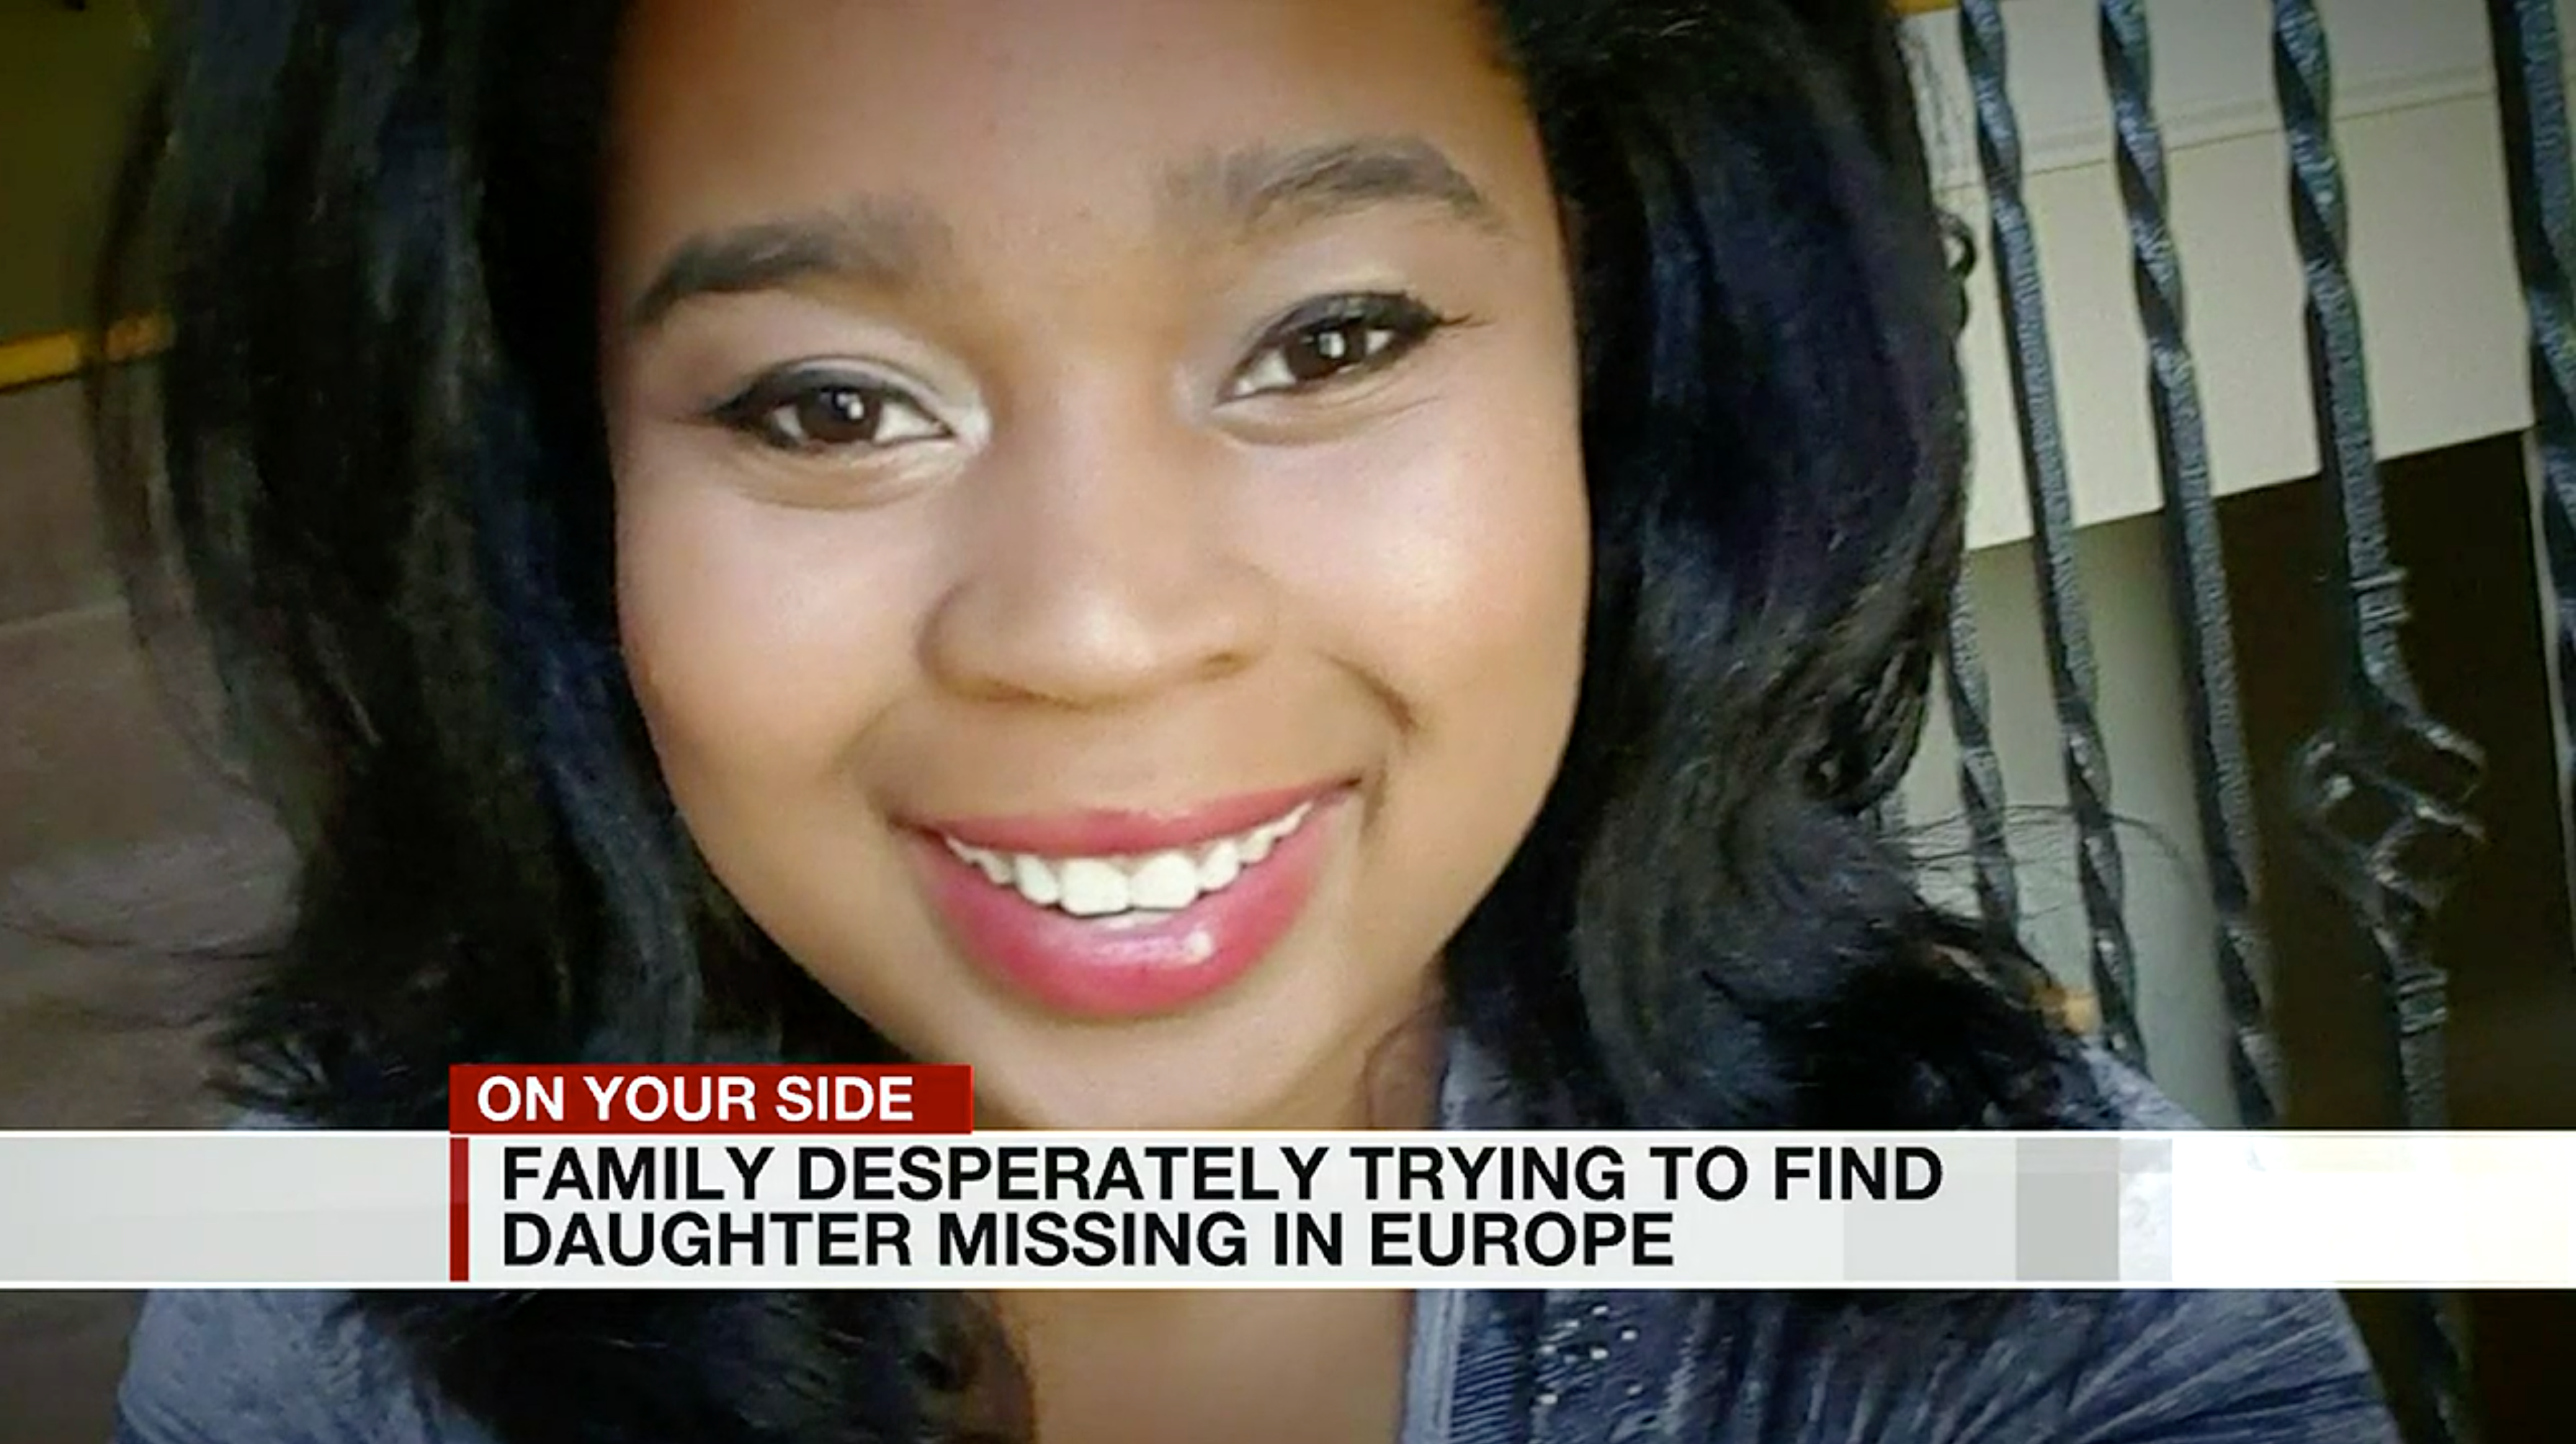 Nicole Denise Jackson, 23, has been found in Germany after her family was unable to reach her for two years